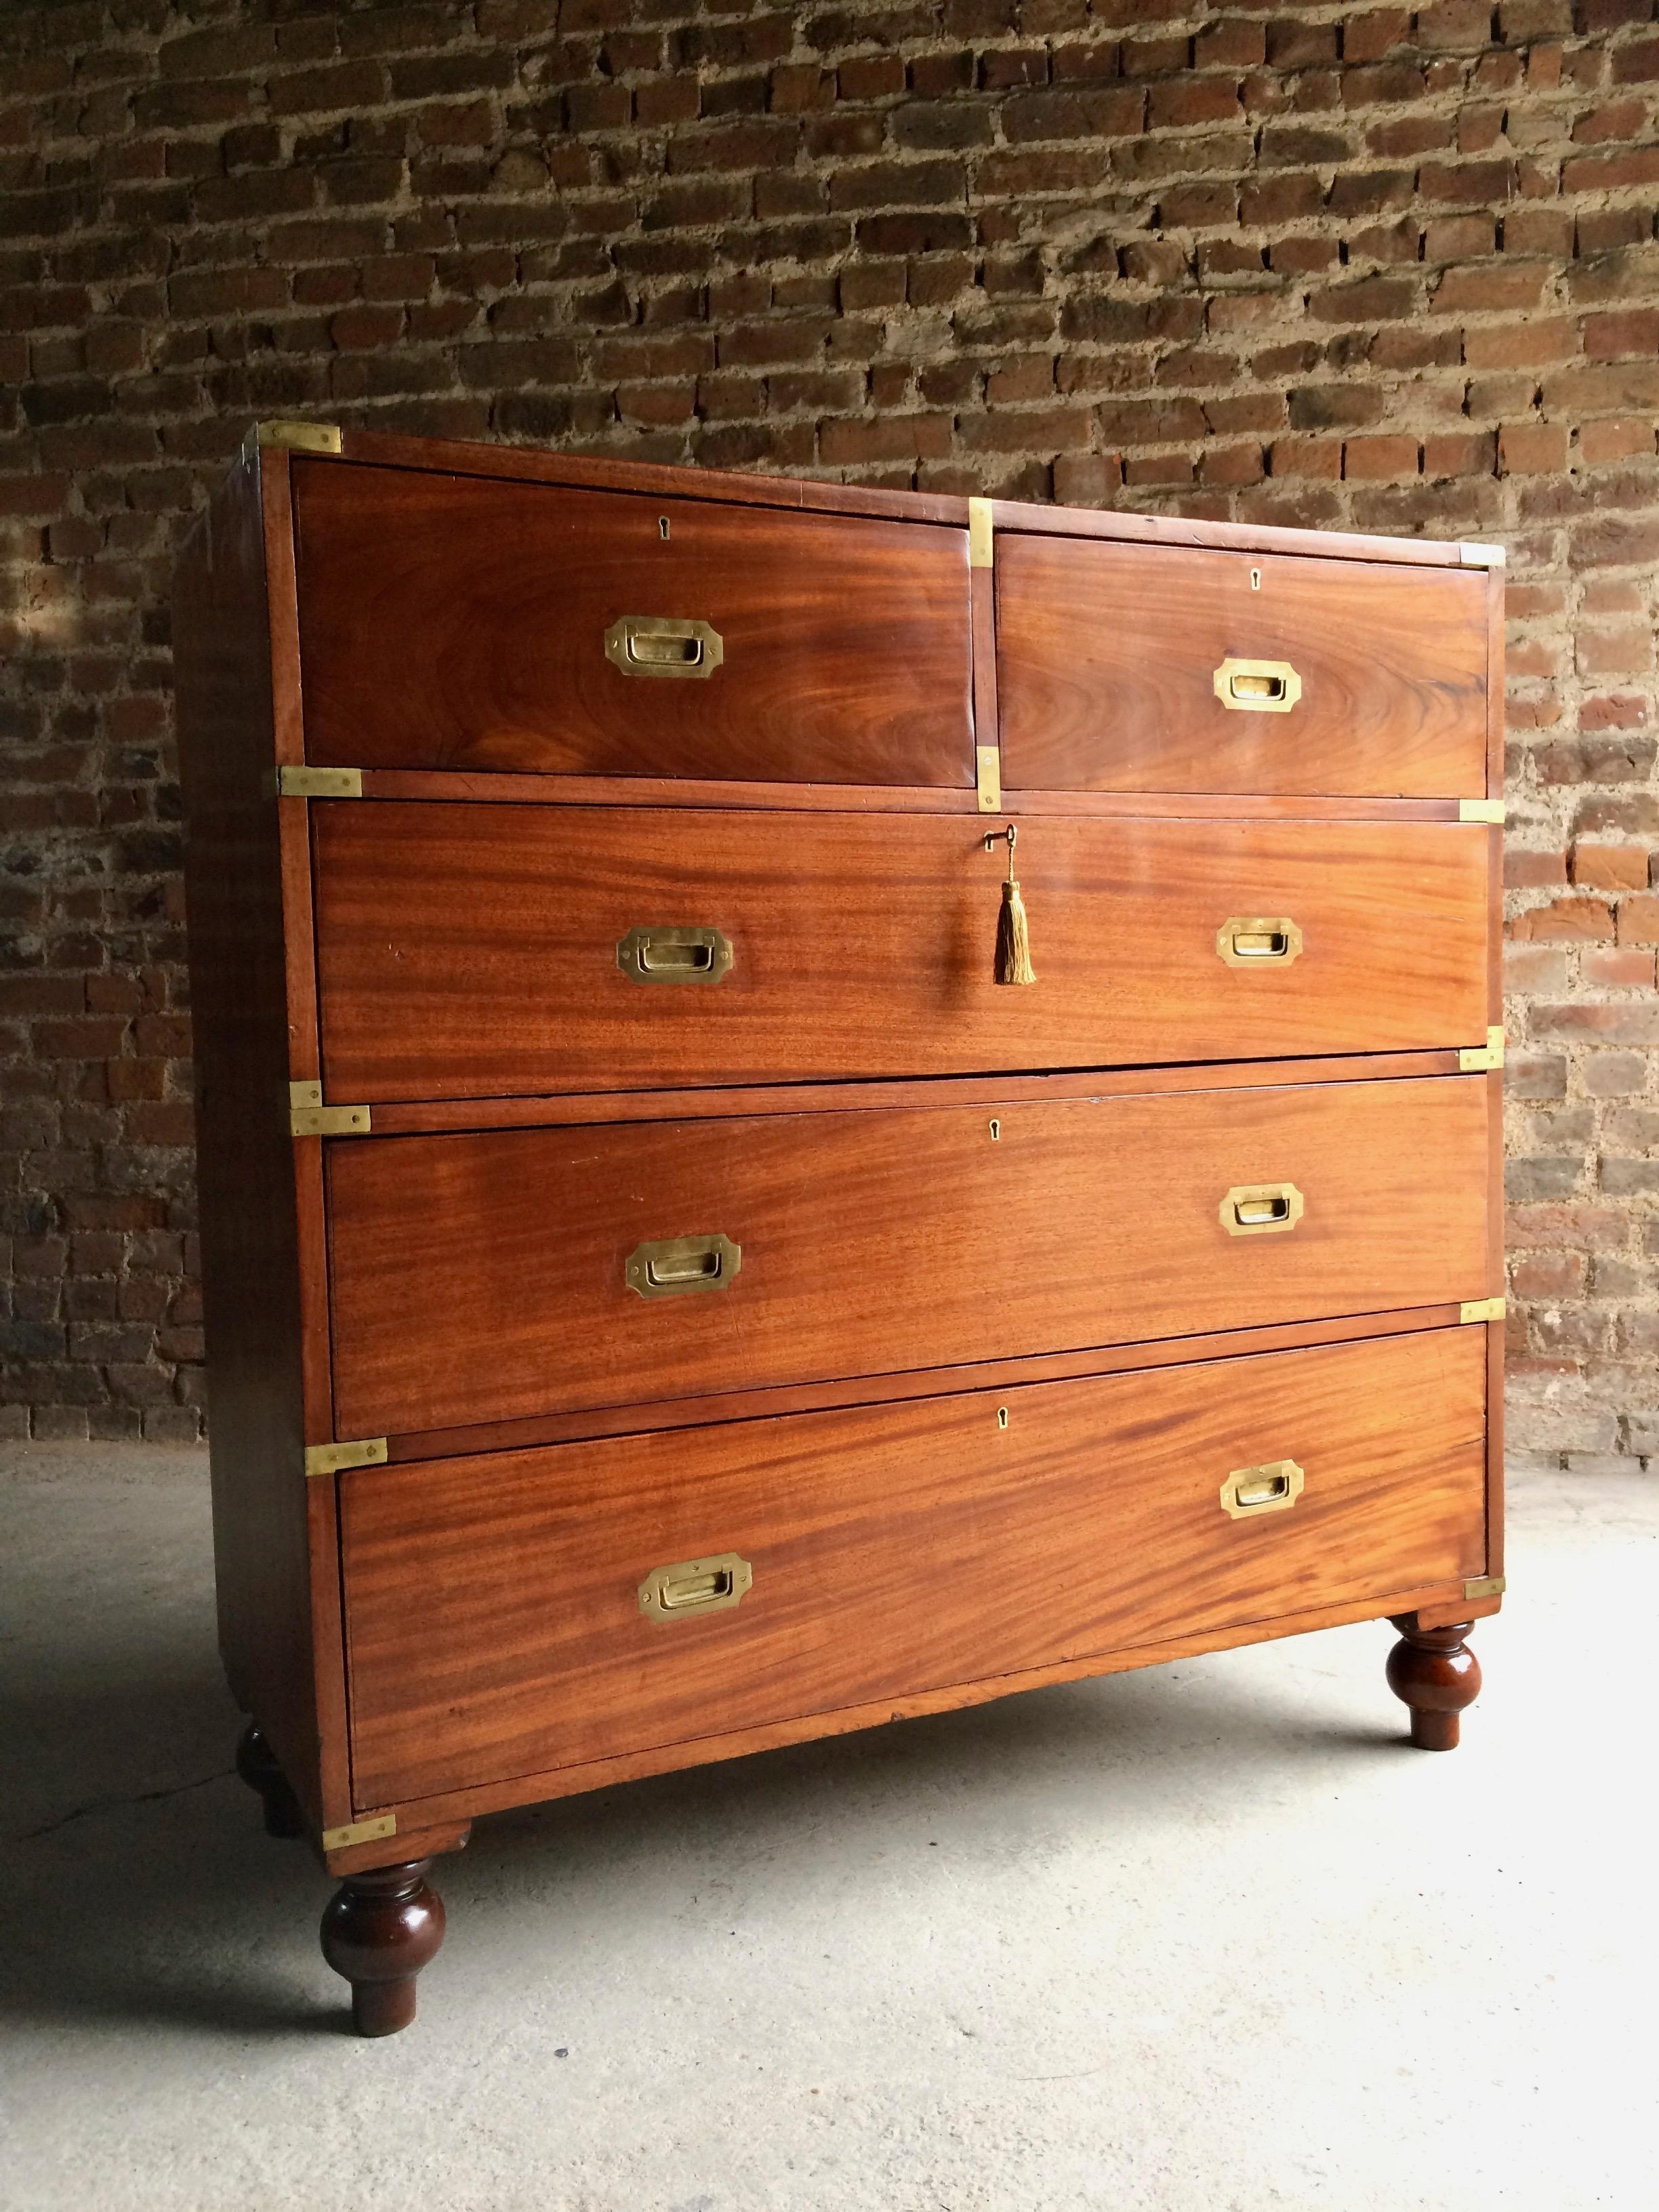 British Antique Campaign Chest of Drawers Dresser Mahogany Tall Military Victorian No.3